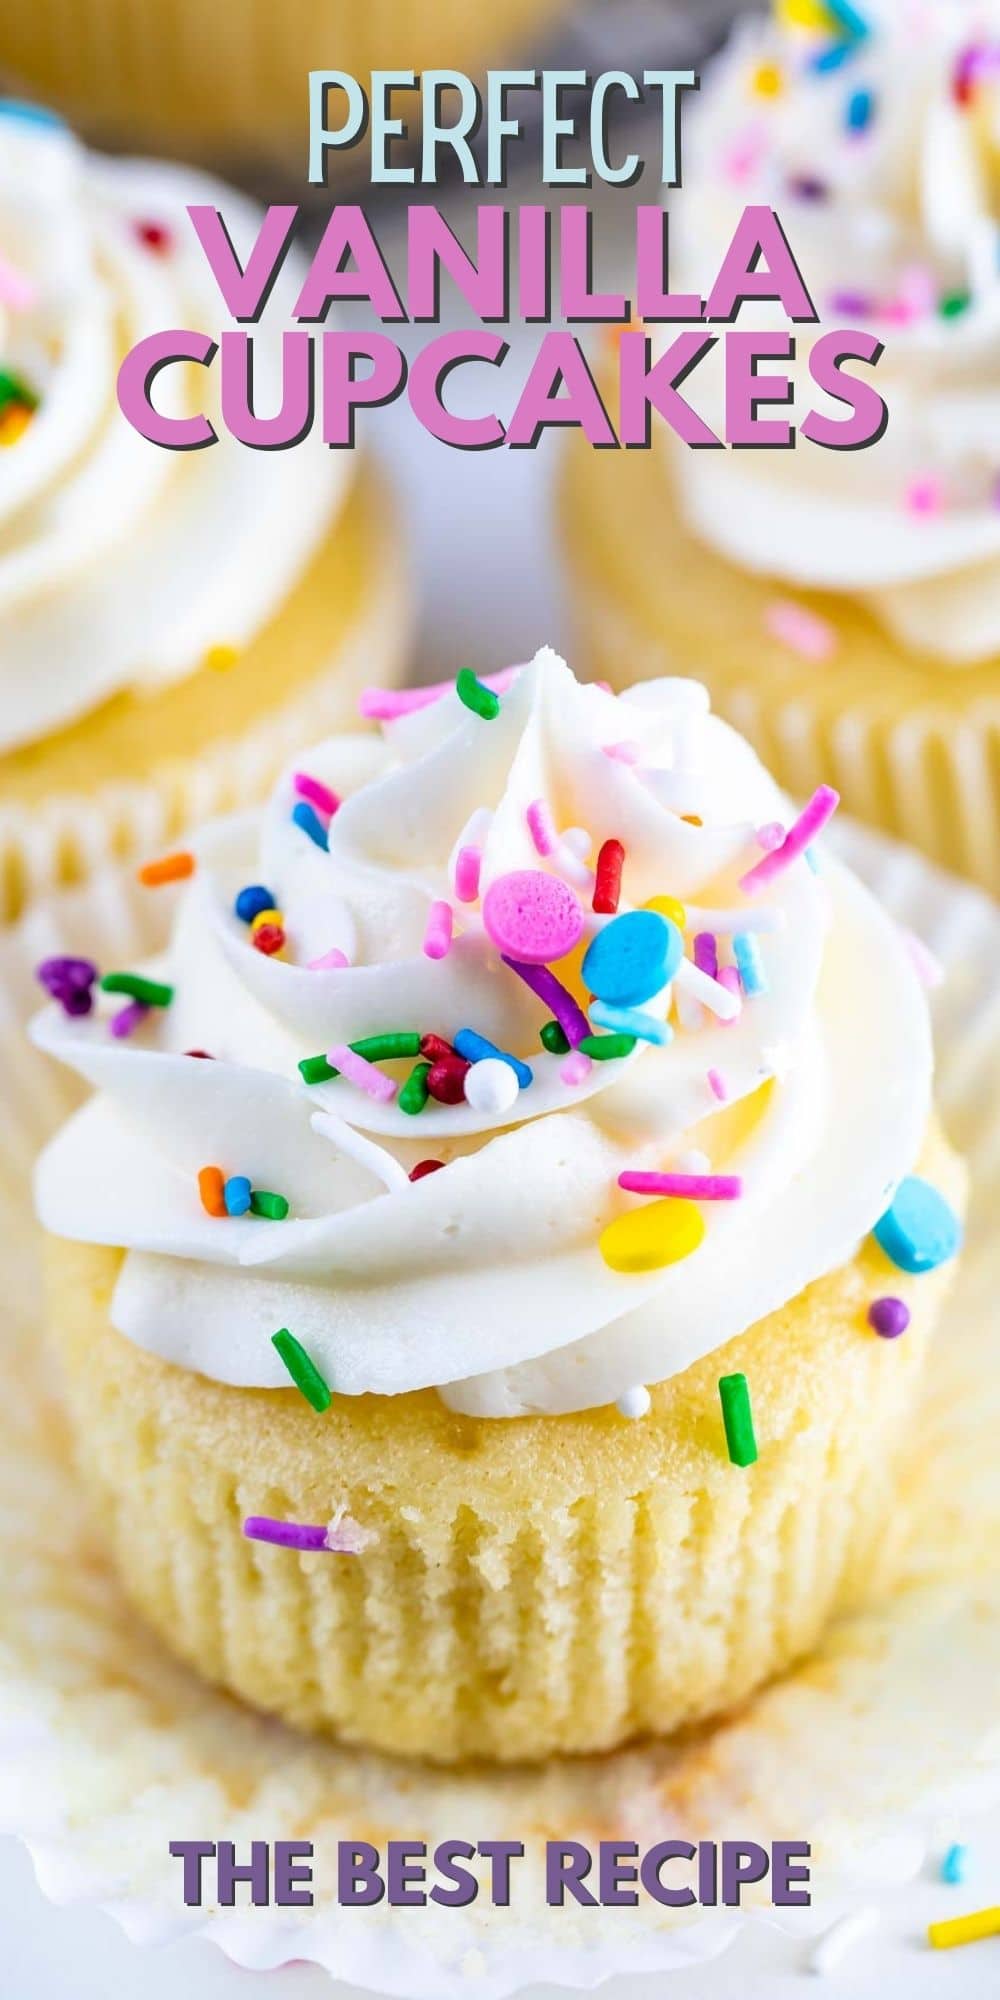 Close up of perfect vanilla cupcake with vanilla buttercream and topped with rainbow sprinkles and recipe title on top of image